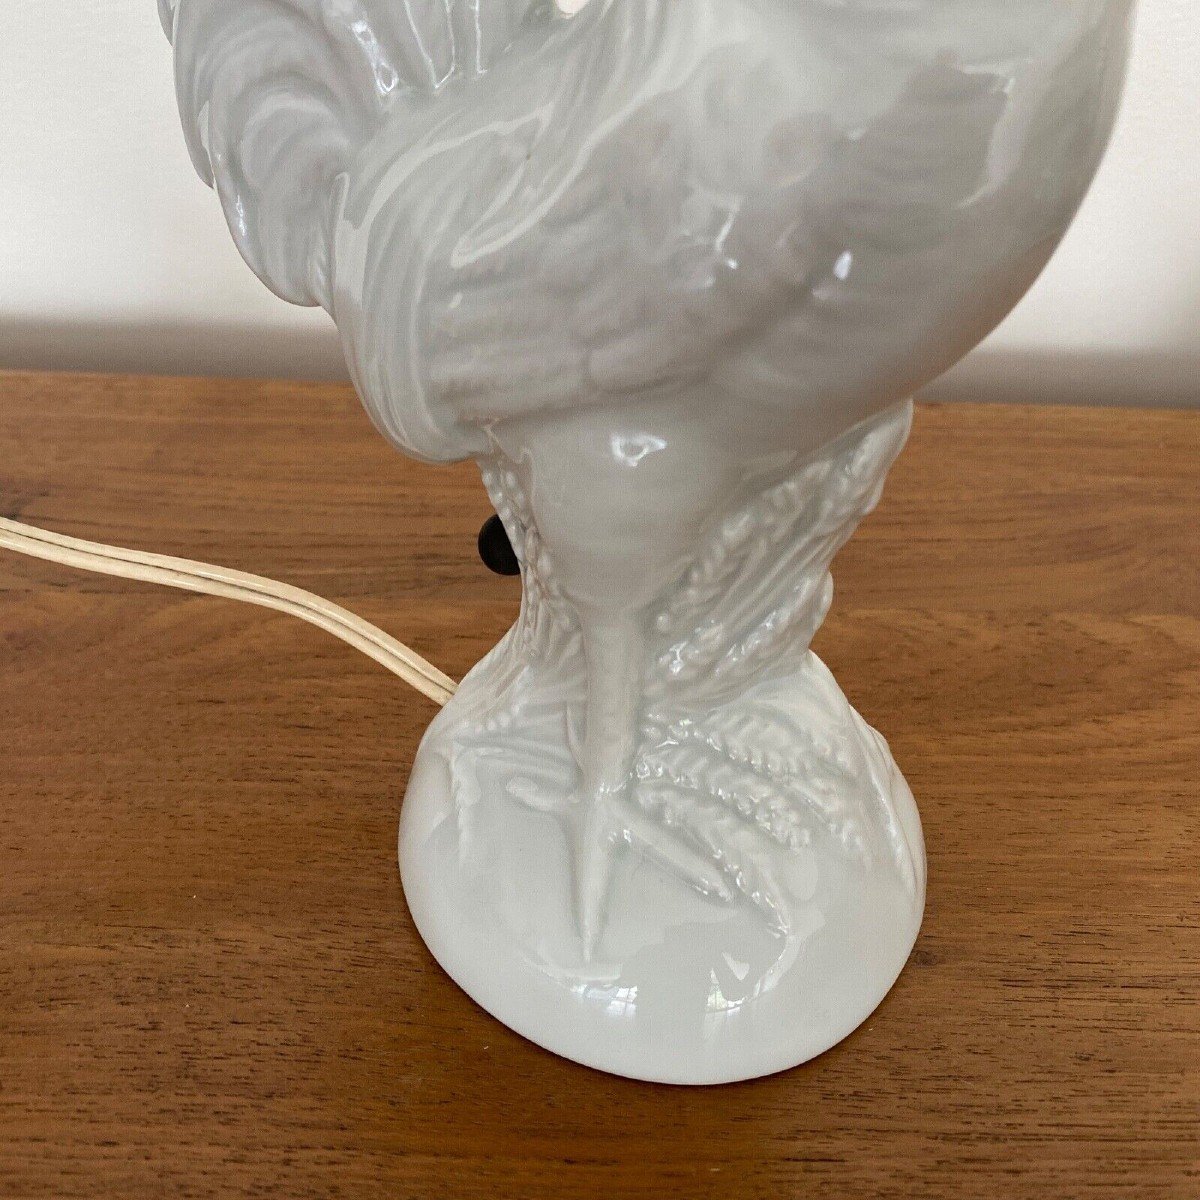 Night Light Representing A Rooster 1930 Porcelain From Limoges France-photo-6